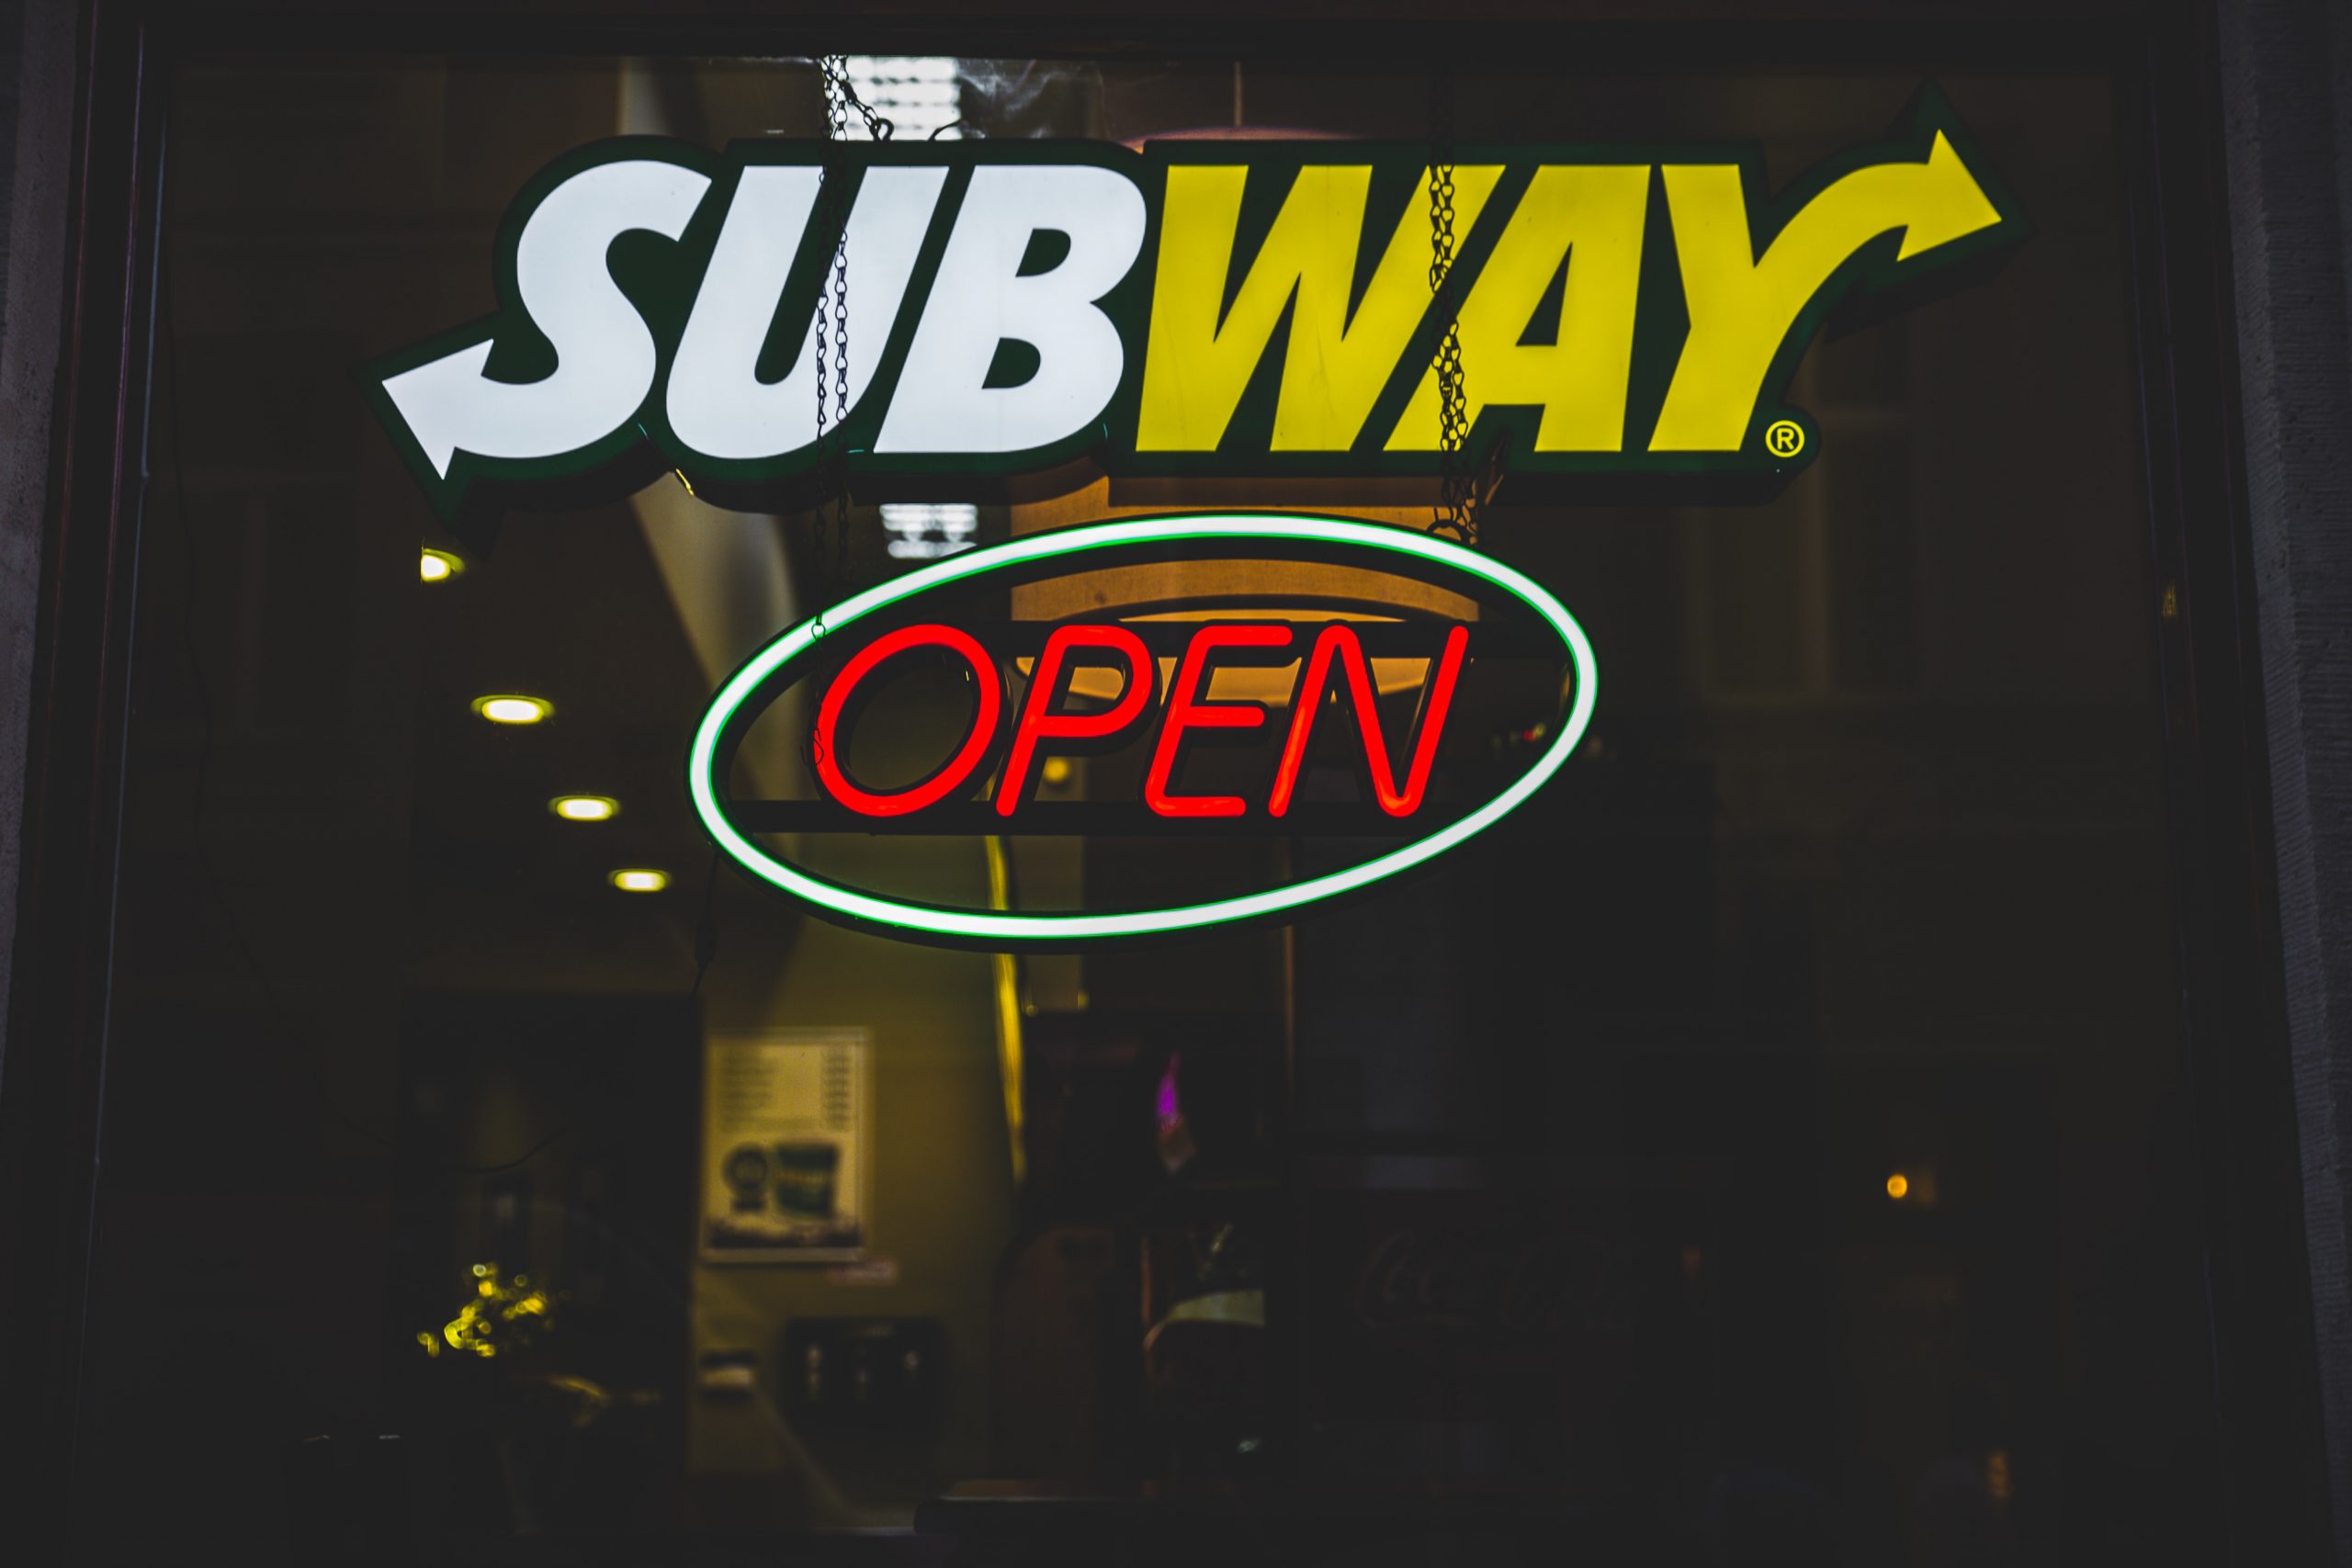 Photograph at night of an illuminated Subway sign above a neon open sign.